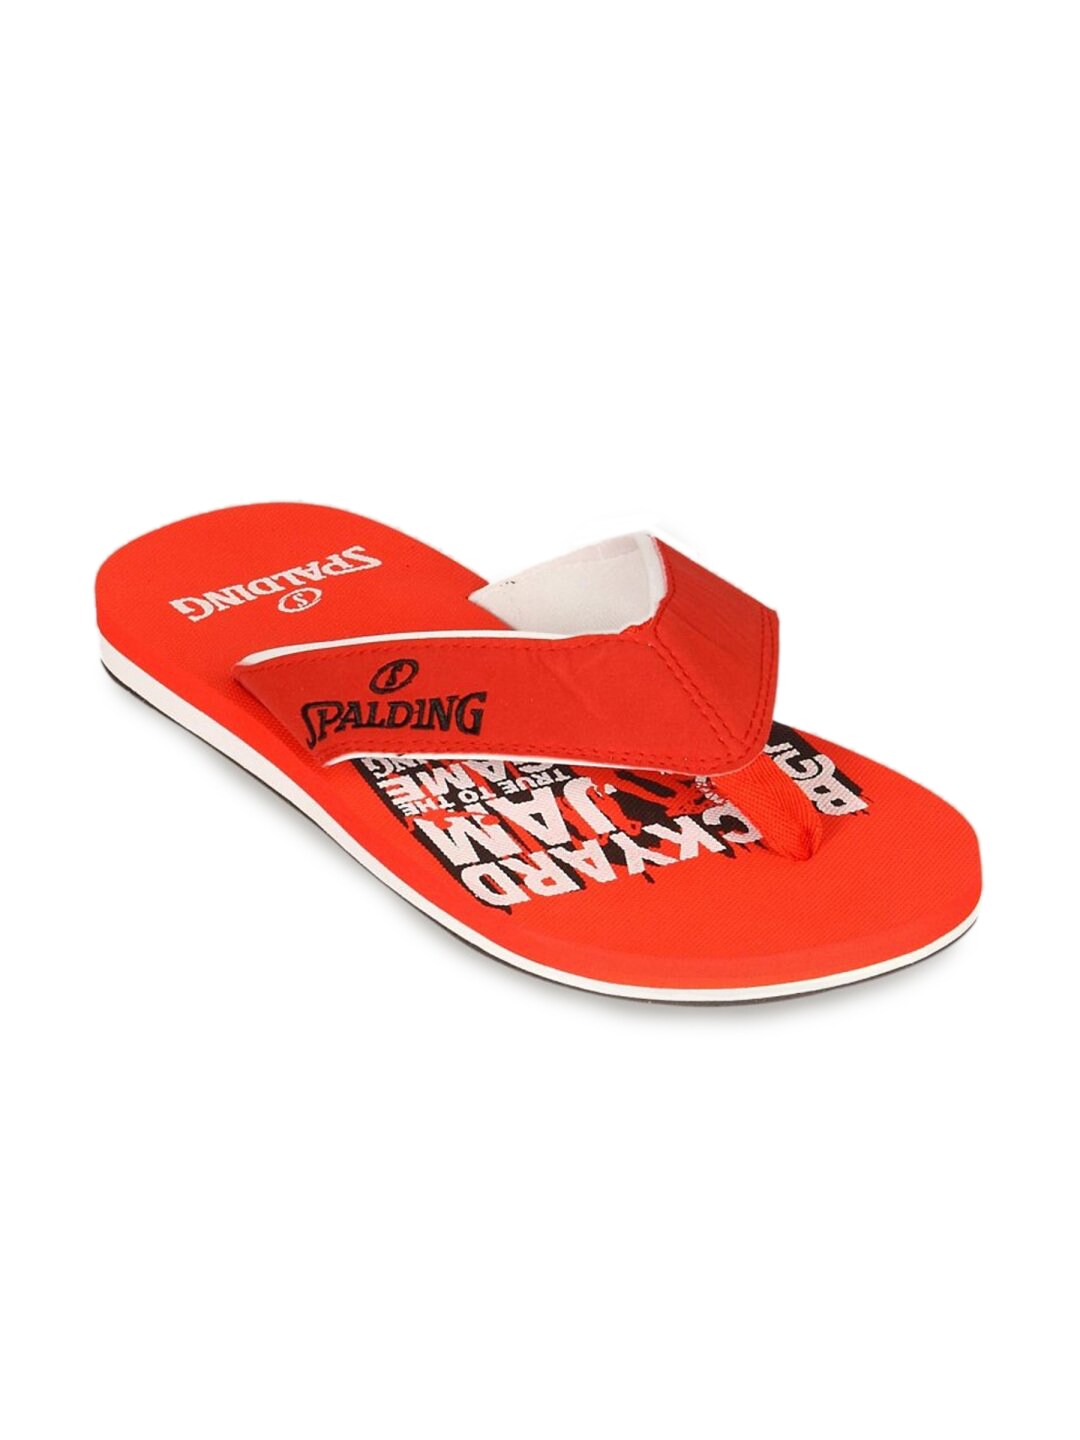 Spalding Men's Red White With Ego Graphic Flip Flop